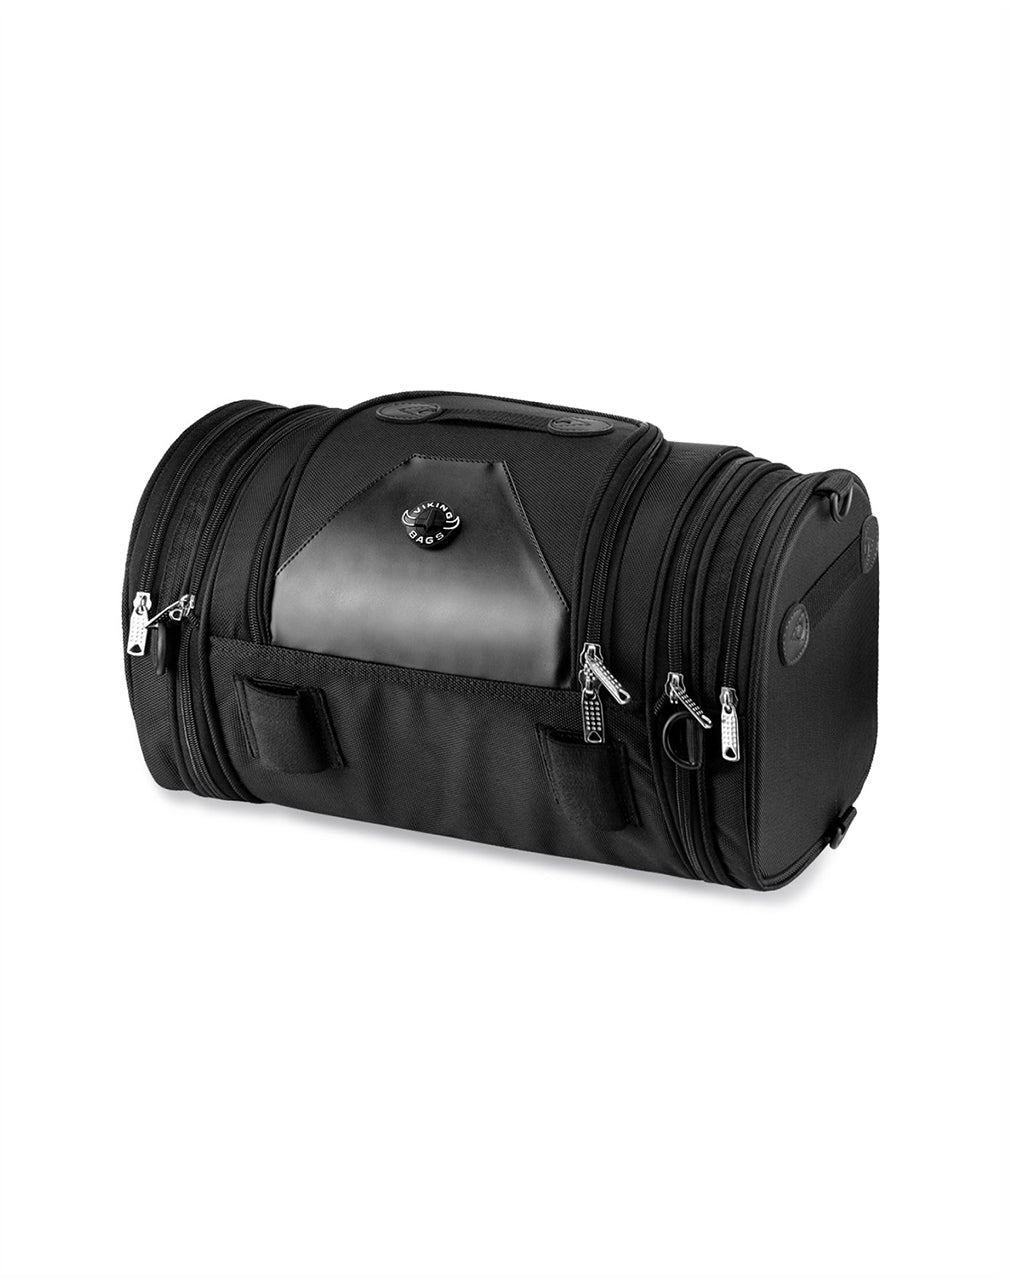 11L - Axwell Small Motorcycle Roll Bag for Harley Davidson